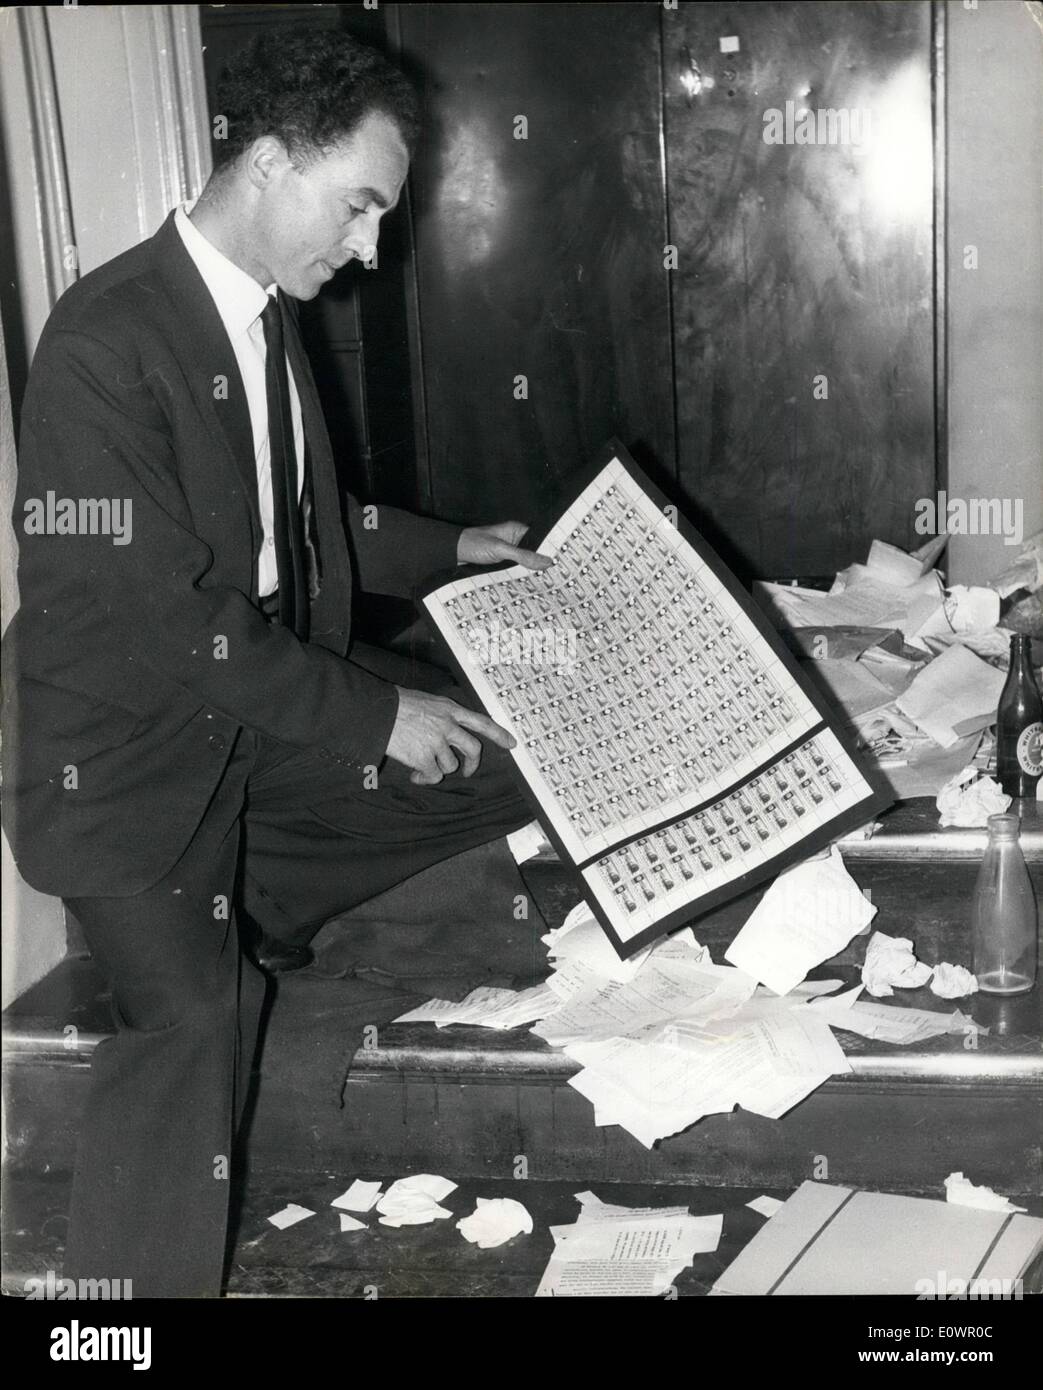 Feb. 02, 1964 - 100,00 Stamps Raid in the Strand: Rare stamps worth up to 100,000 were stolen by a gang who broke into the office of a leading Strand stamp dealer in London last night. The raiders cut open two safes containing hundreds of rare and historic stamp. Some of them unique, including a sheet of 120 New Zealand 1/9d railway stamps issued last year with their value and red colouring omitted, valued at about 10,200. Photo shows Mr Stock Photo